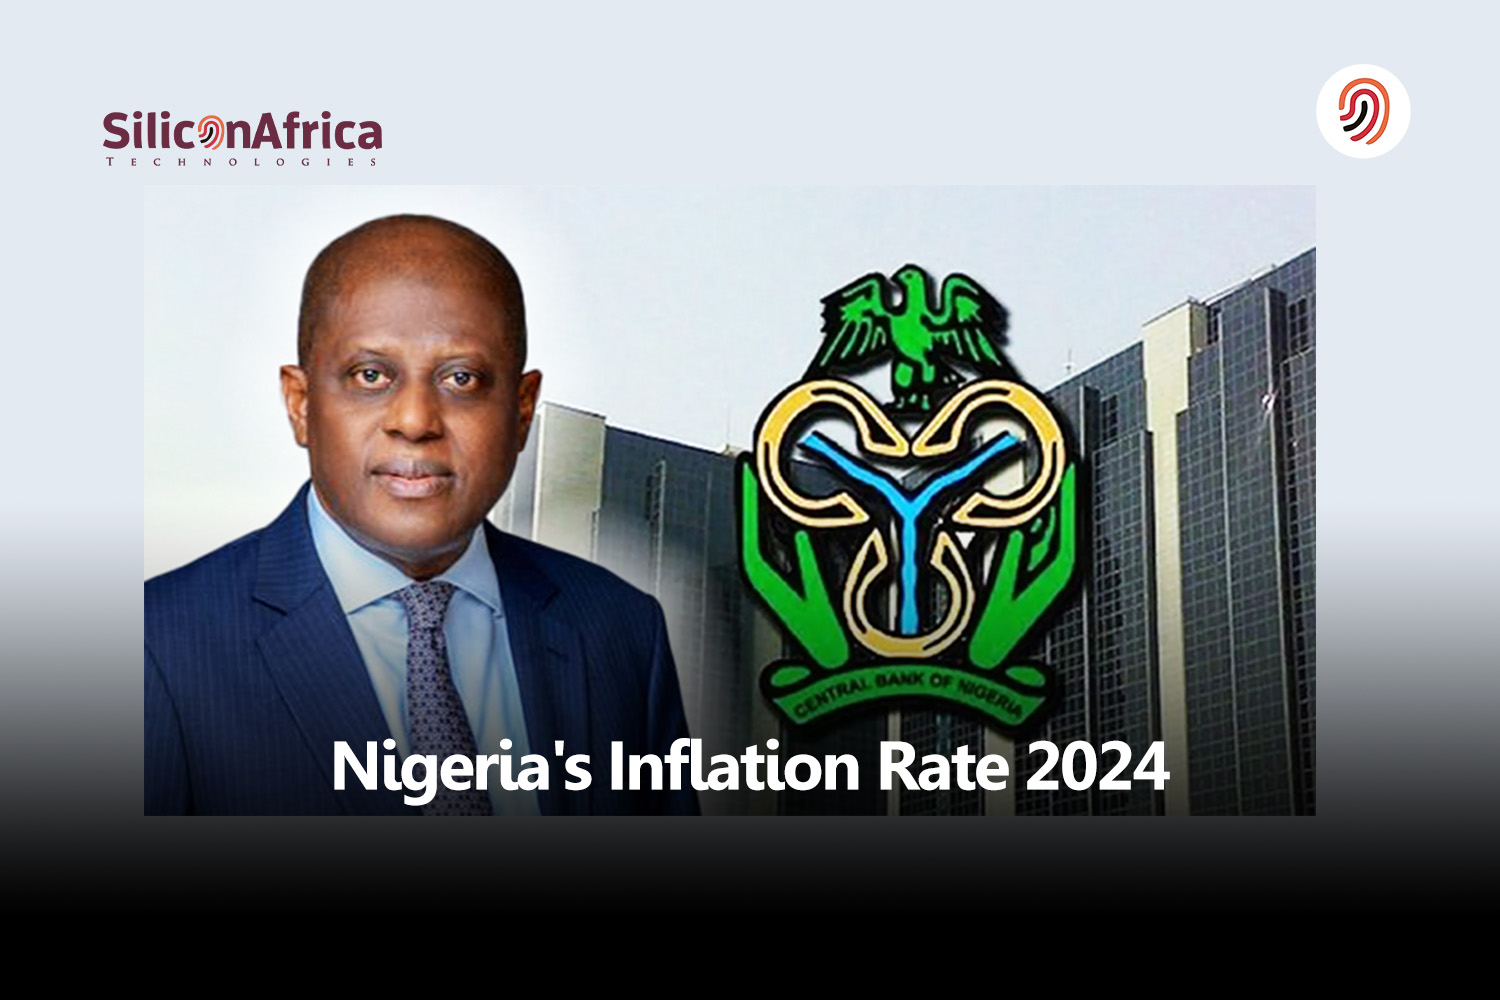 Nigeria’s inflation rate